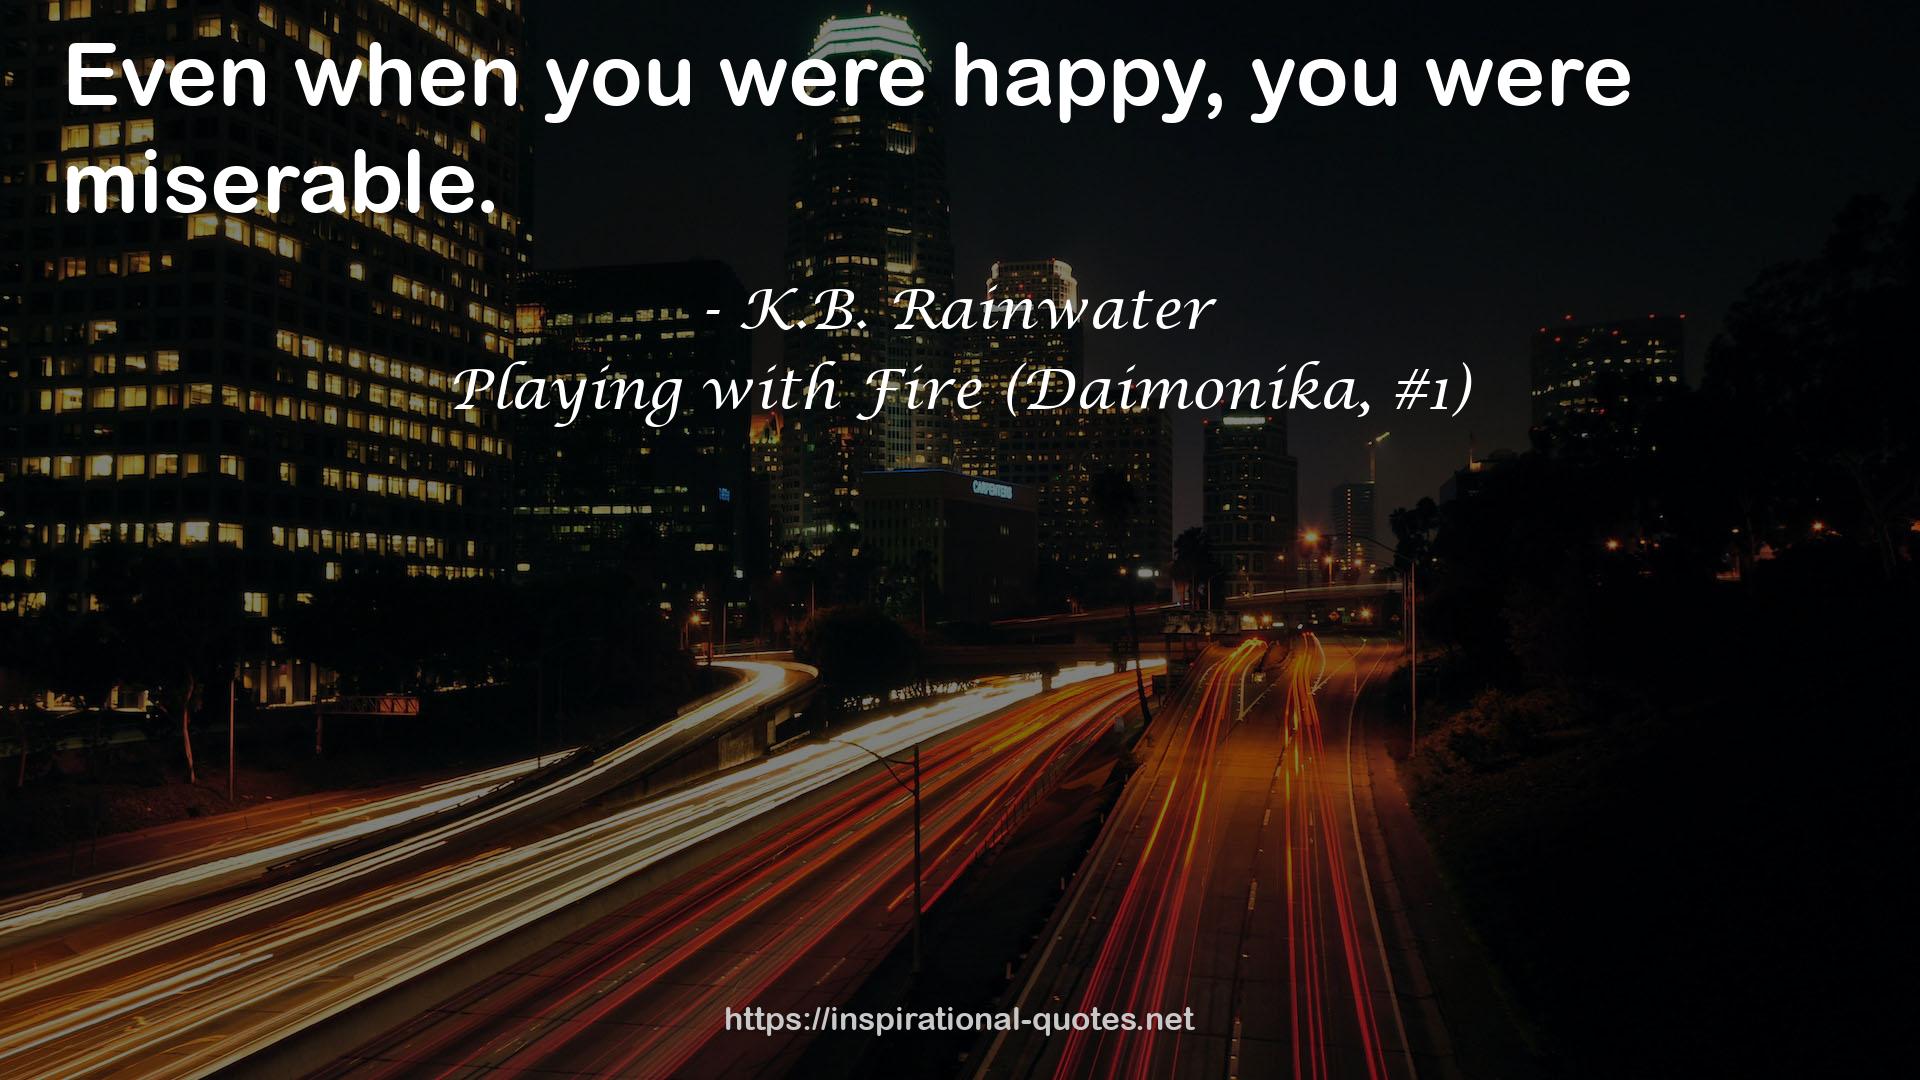 Playing with Fire (Daimonika, #1) QUOTES